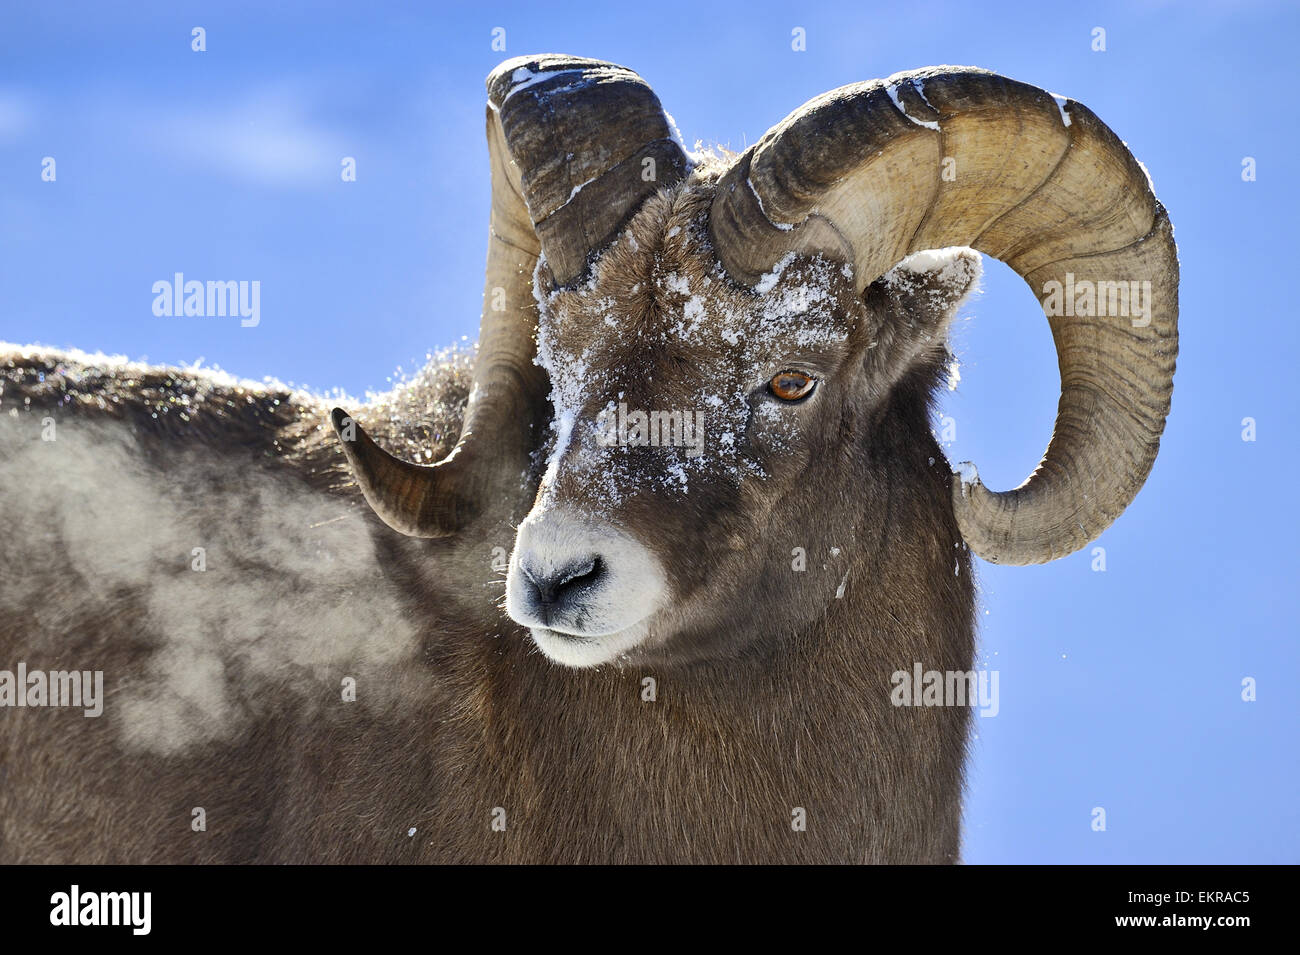 A close up portrait image of a rocky mountain bighorn ram , Stock Photo